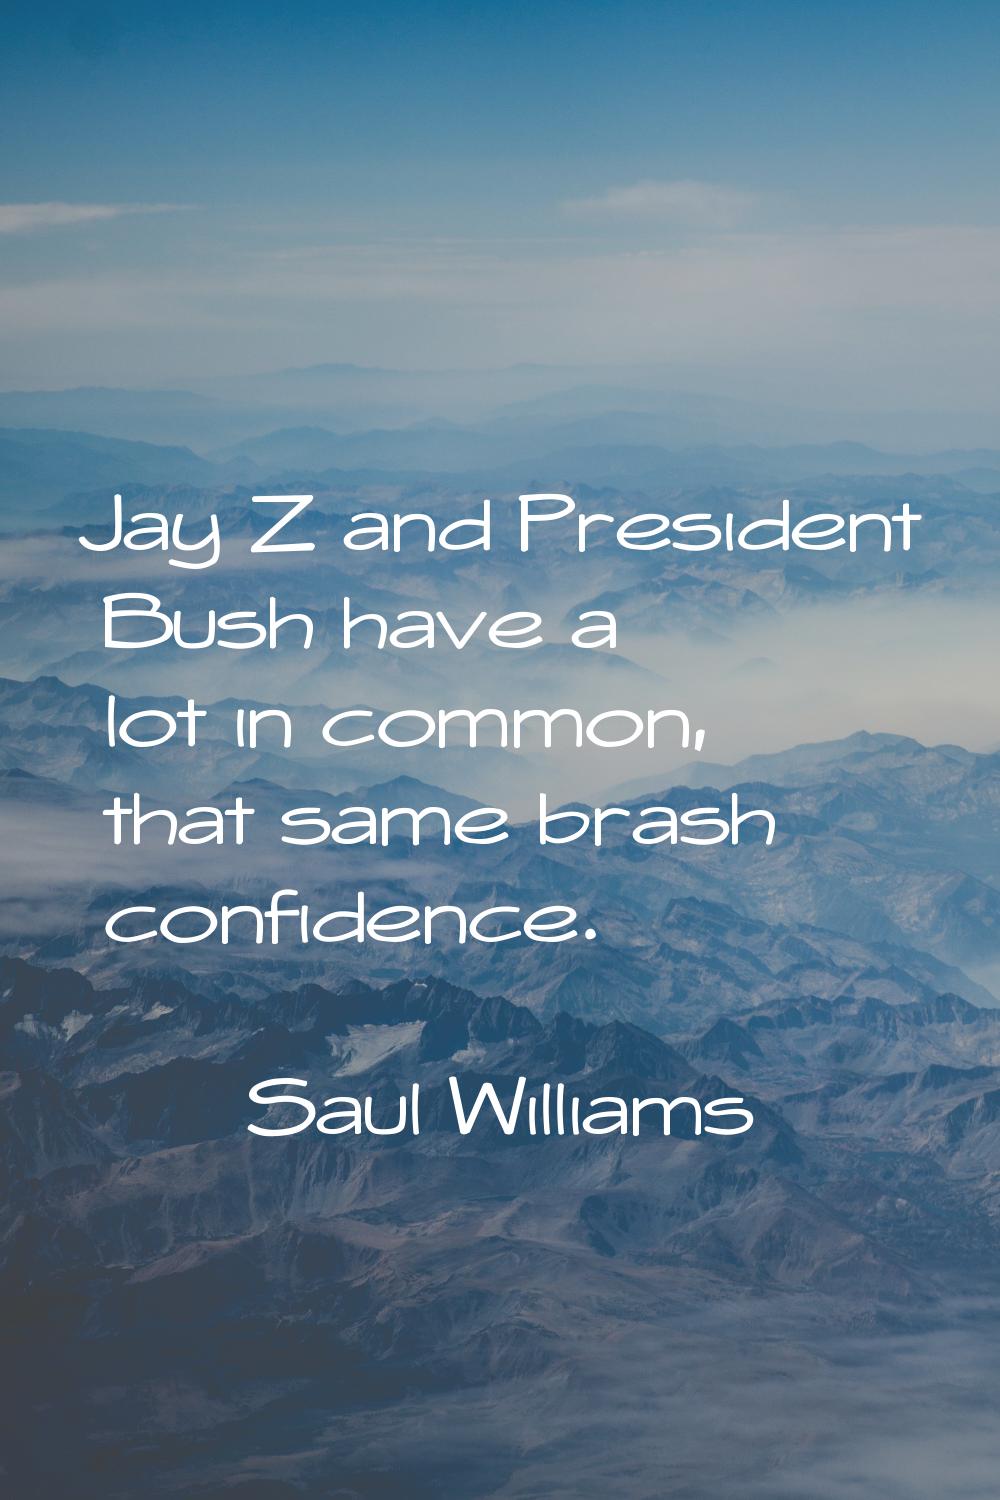 Jay Z and President Bush have a lot in common, that same brash confidence.